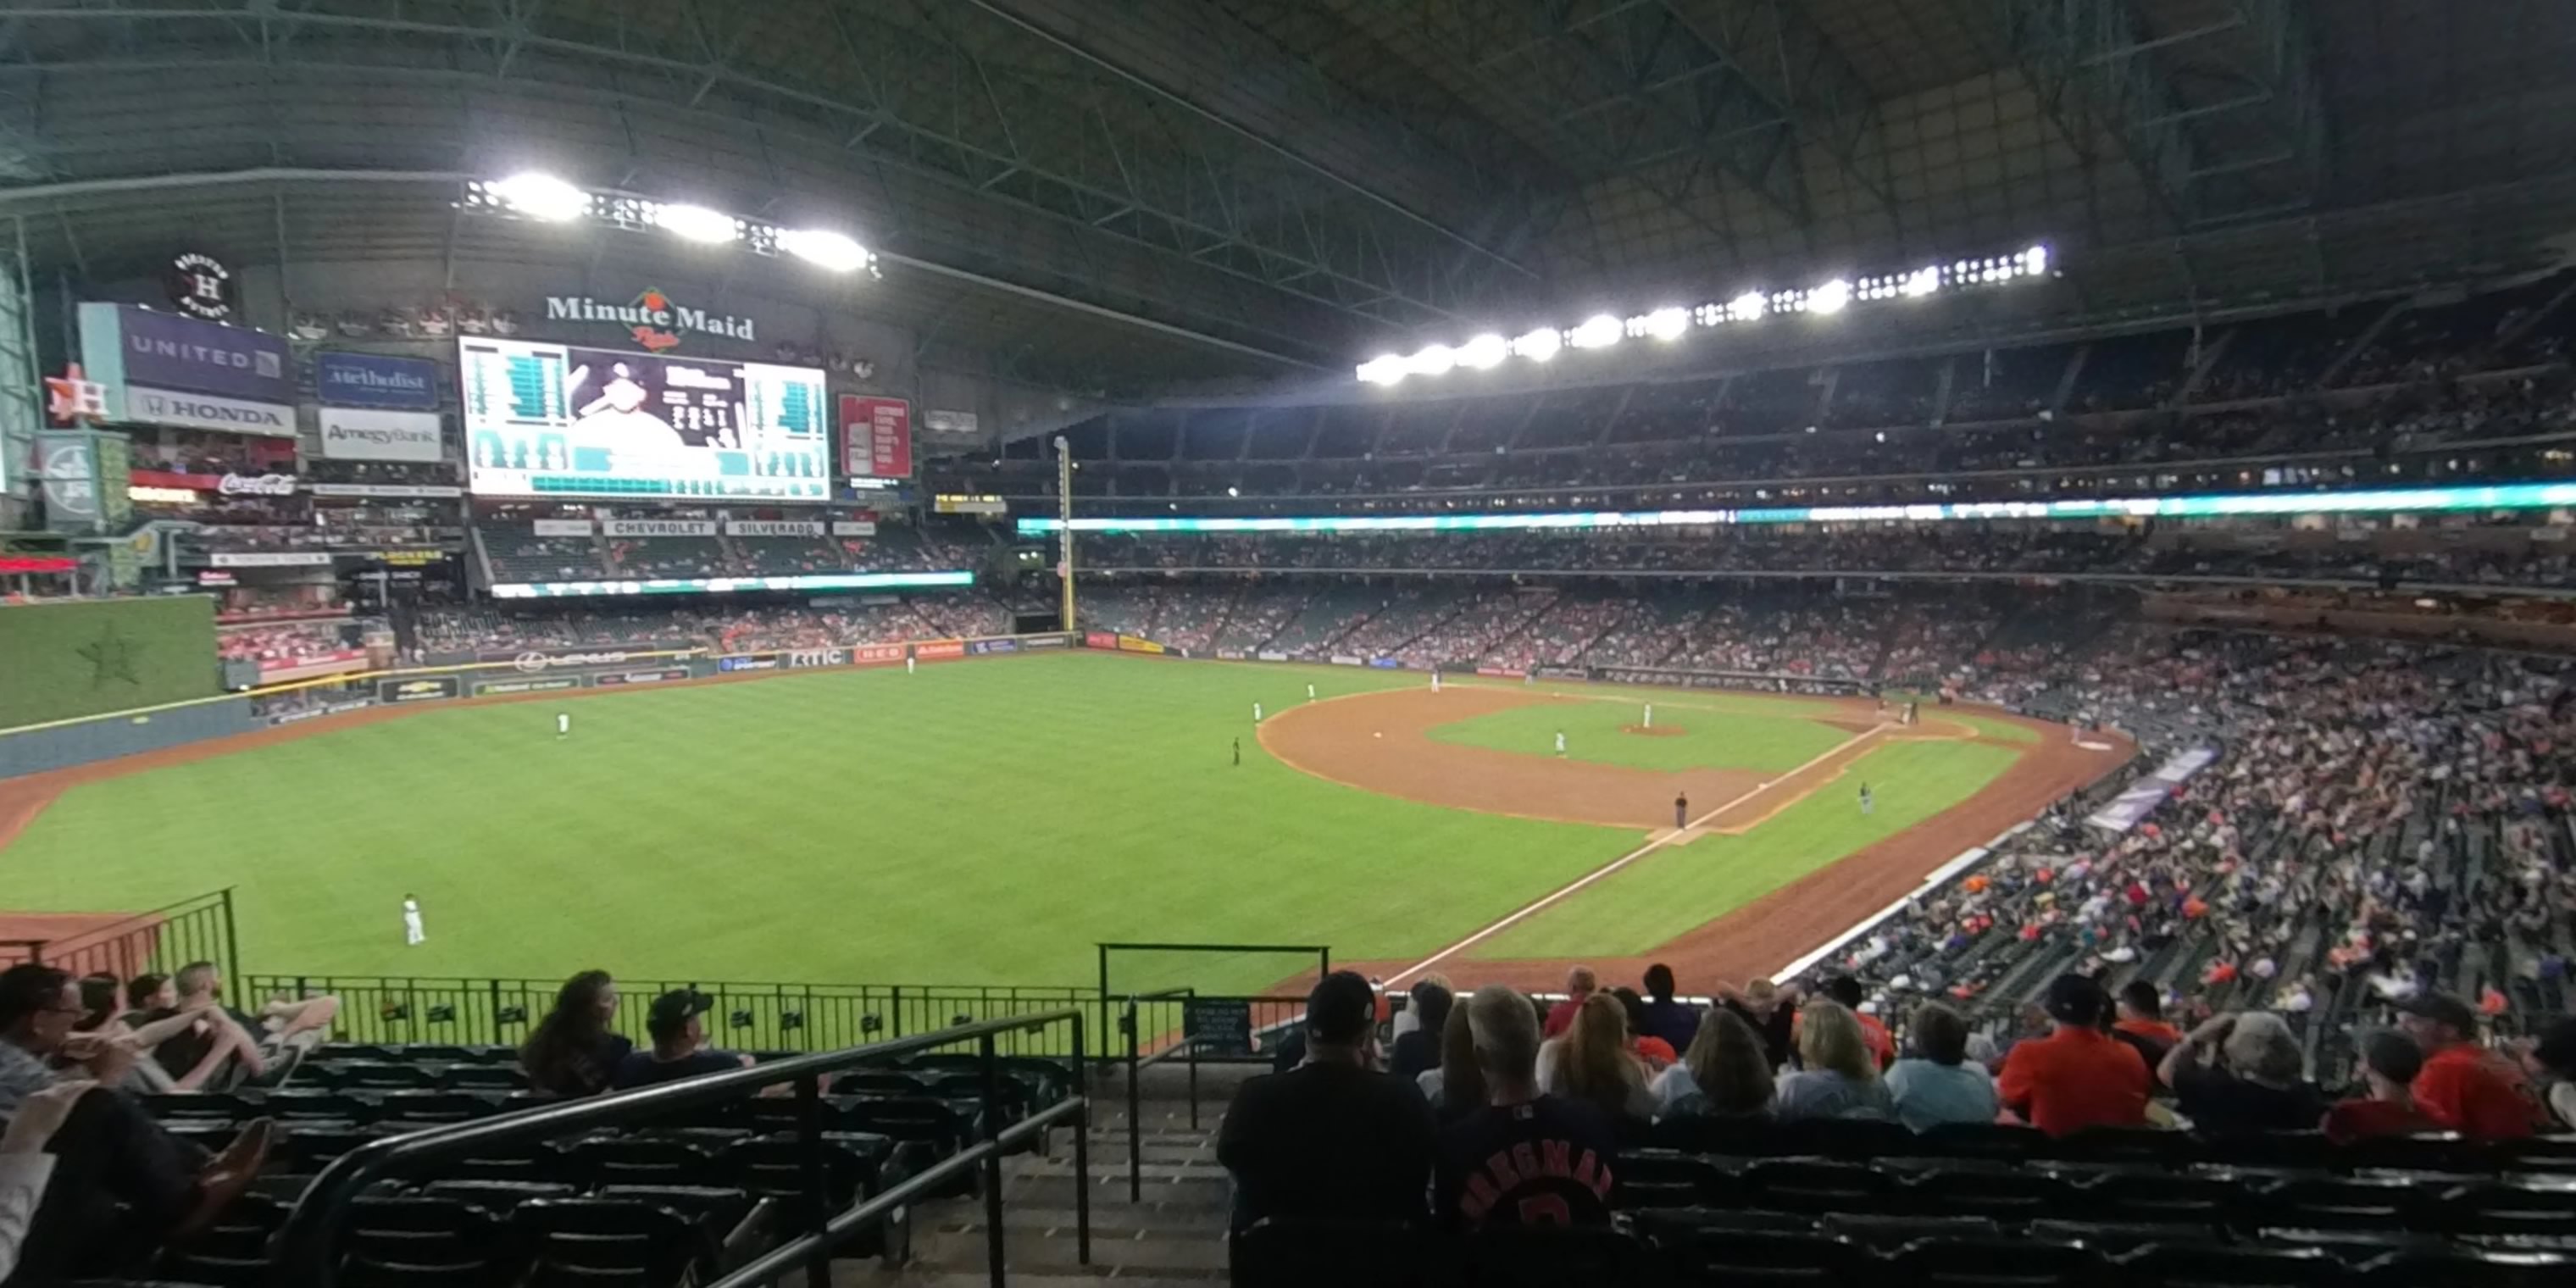 section 205 panoramic seat view  for baseball - minute maid park